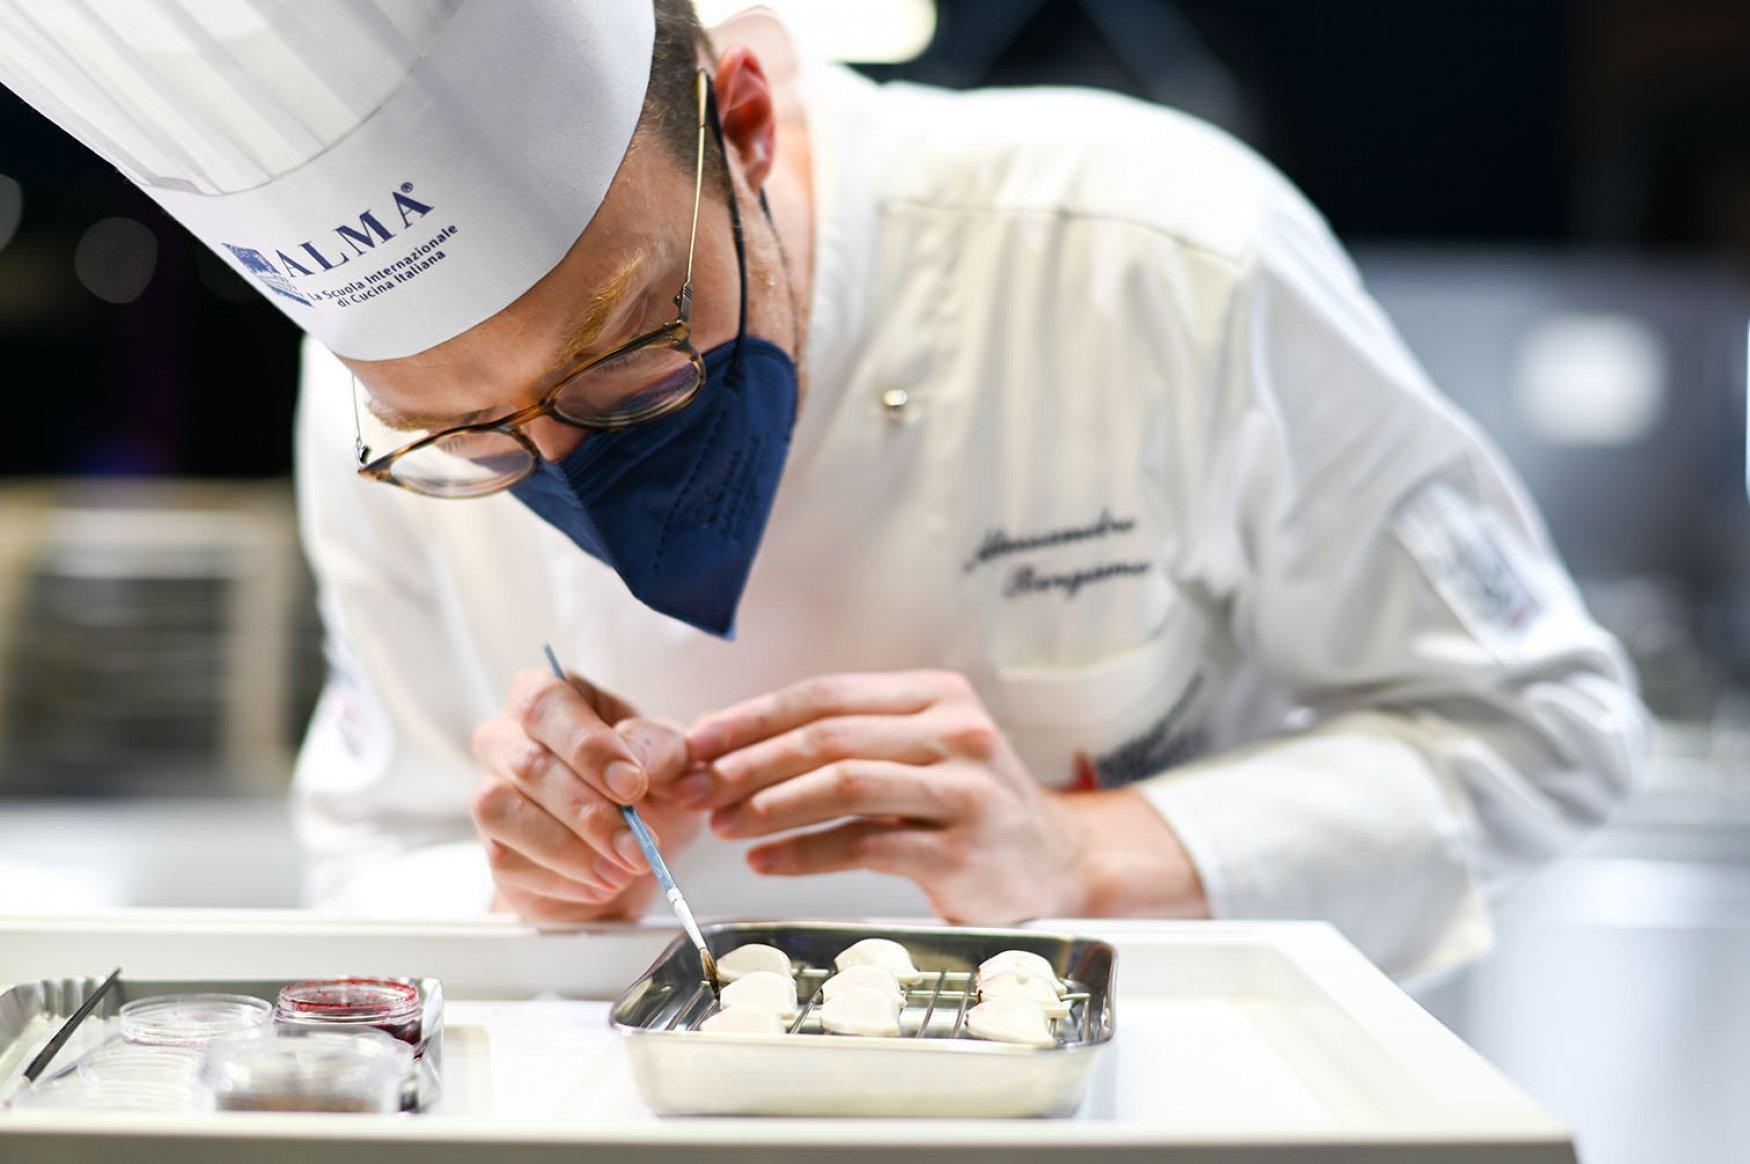 S.Pellegrino Supports Chefs Of Tomorrow With Fifth Edition Of Young Chef Academy Competition